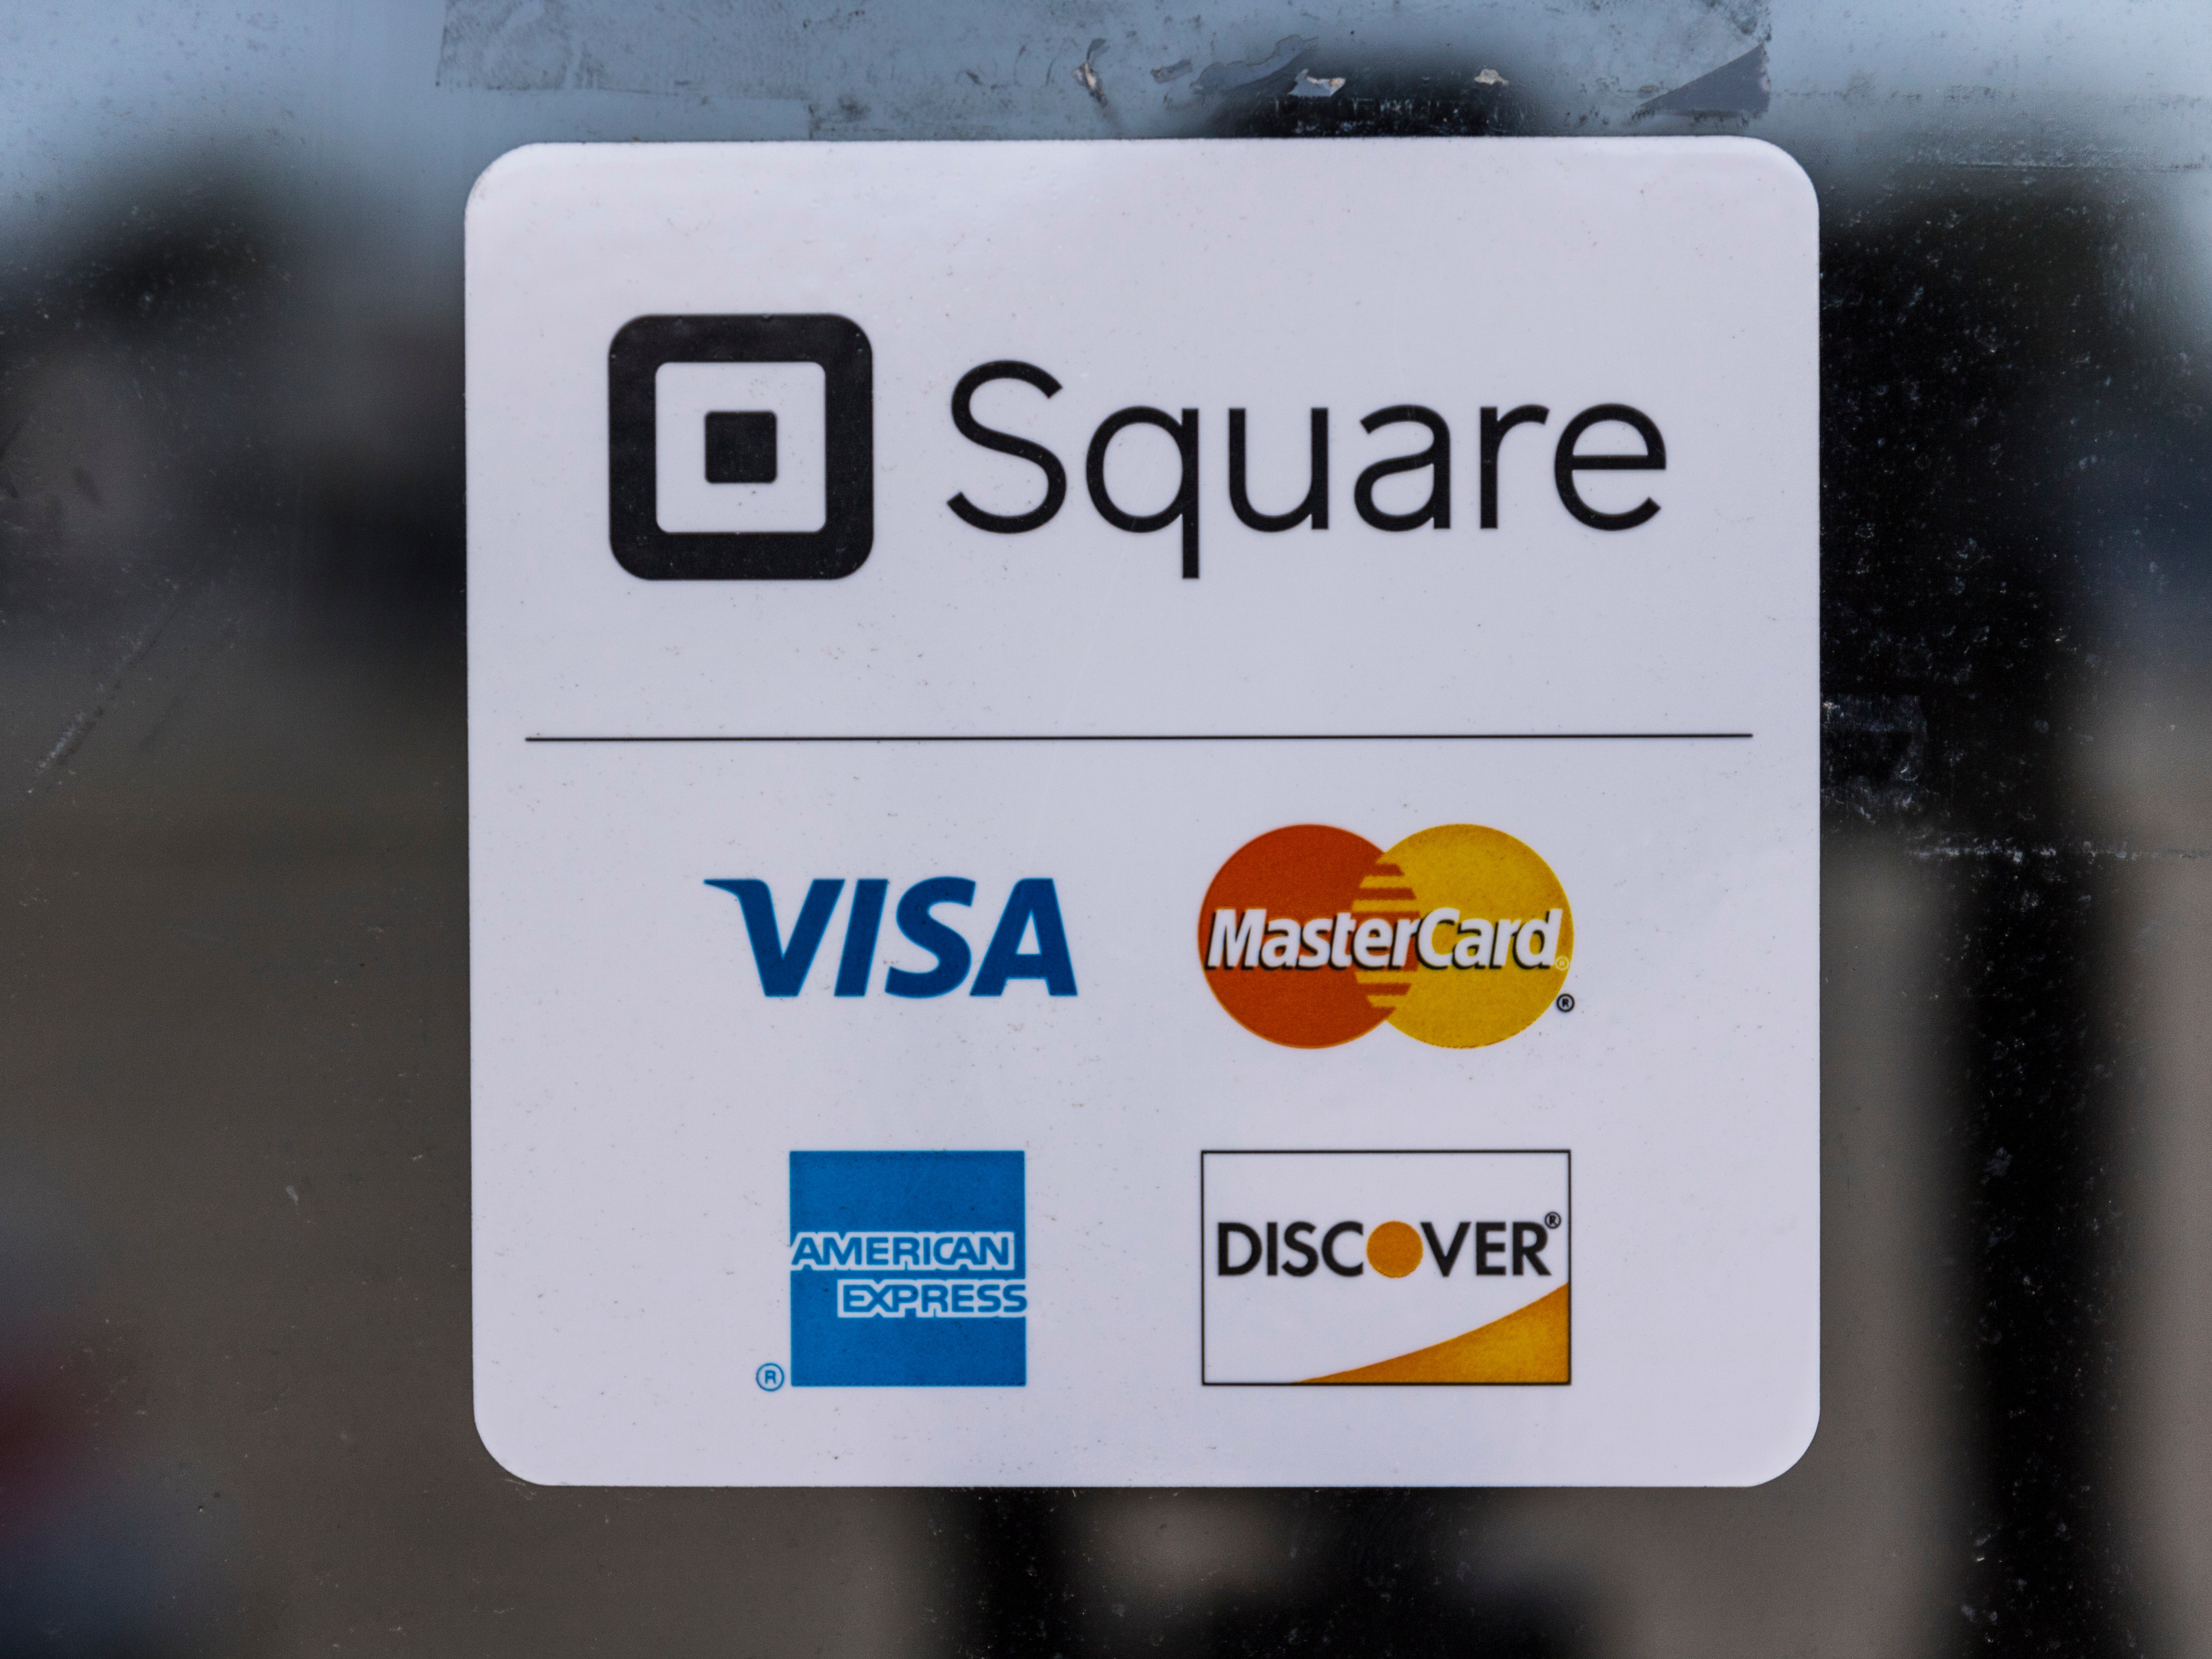 Banks square up to Afterpay and Apple in payments fight